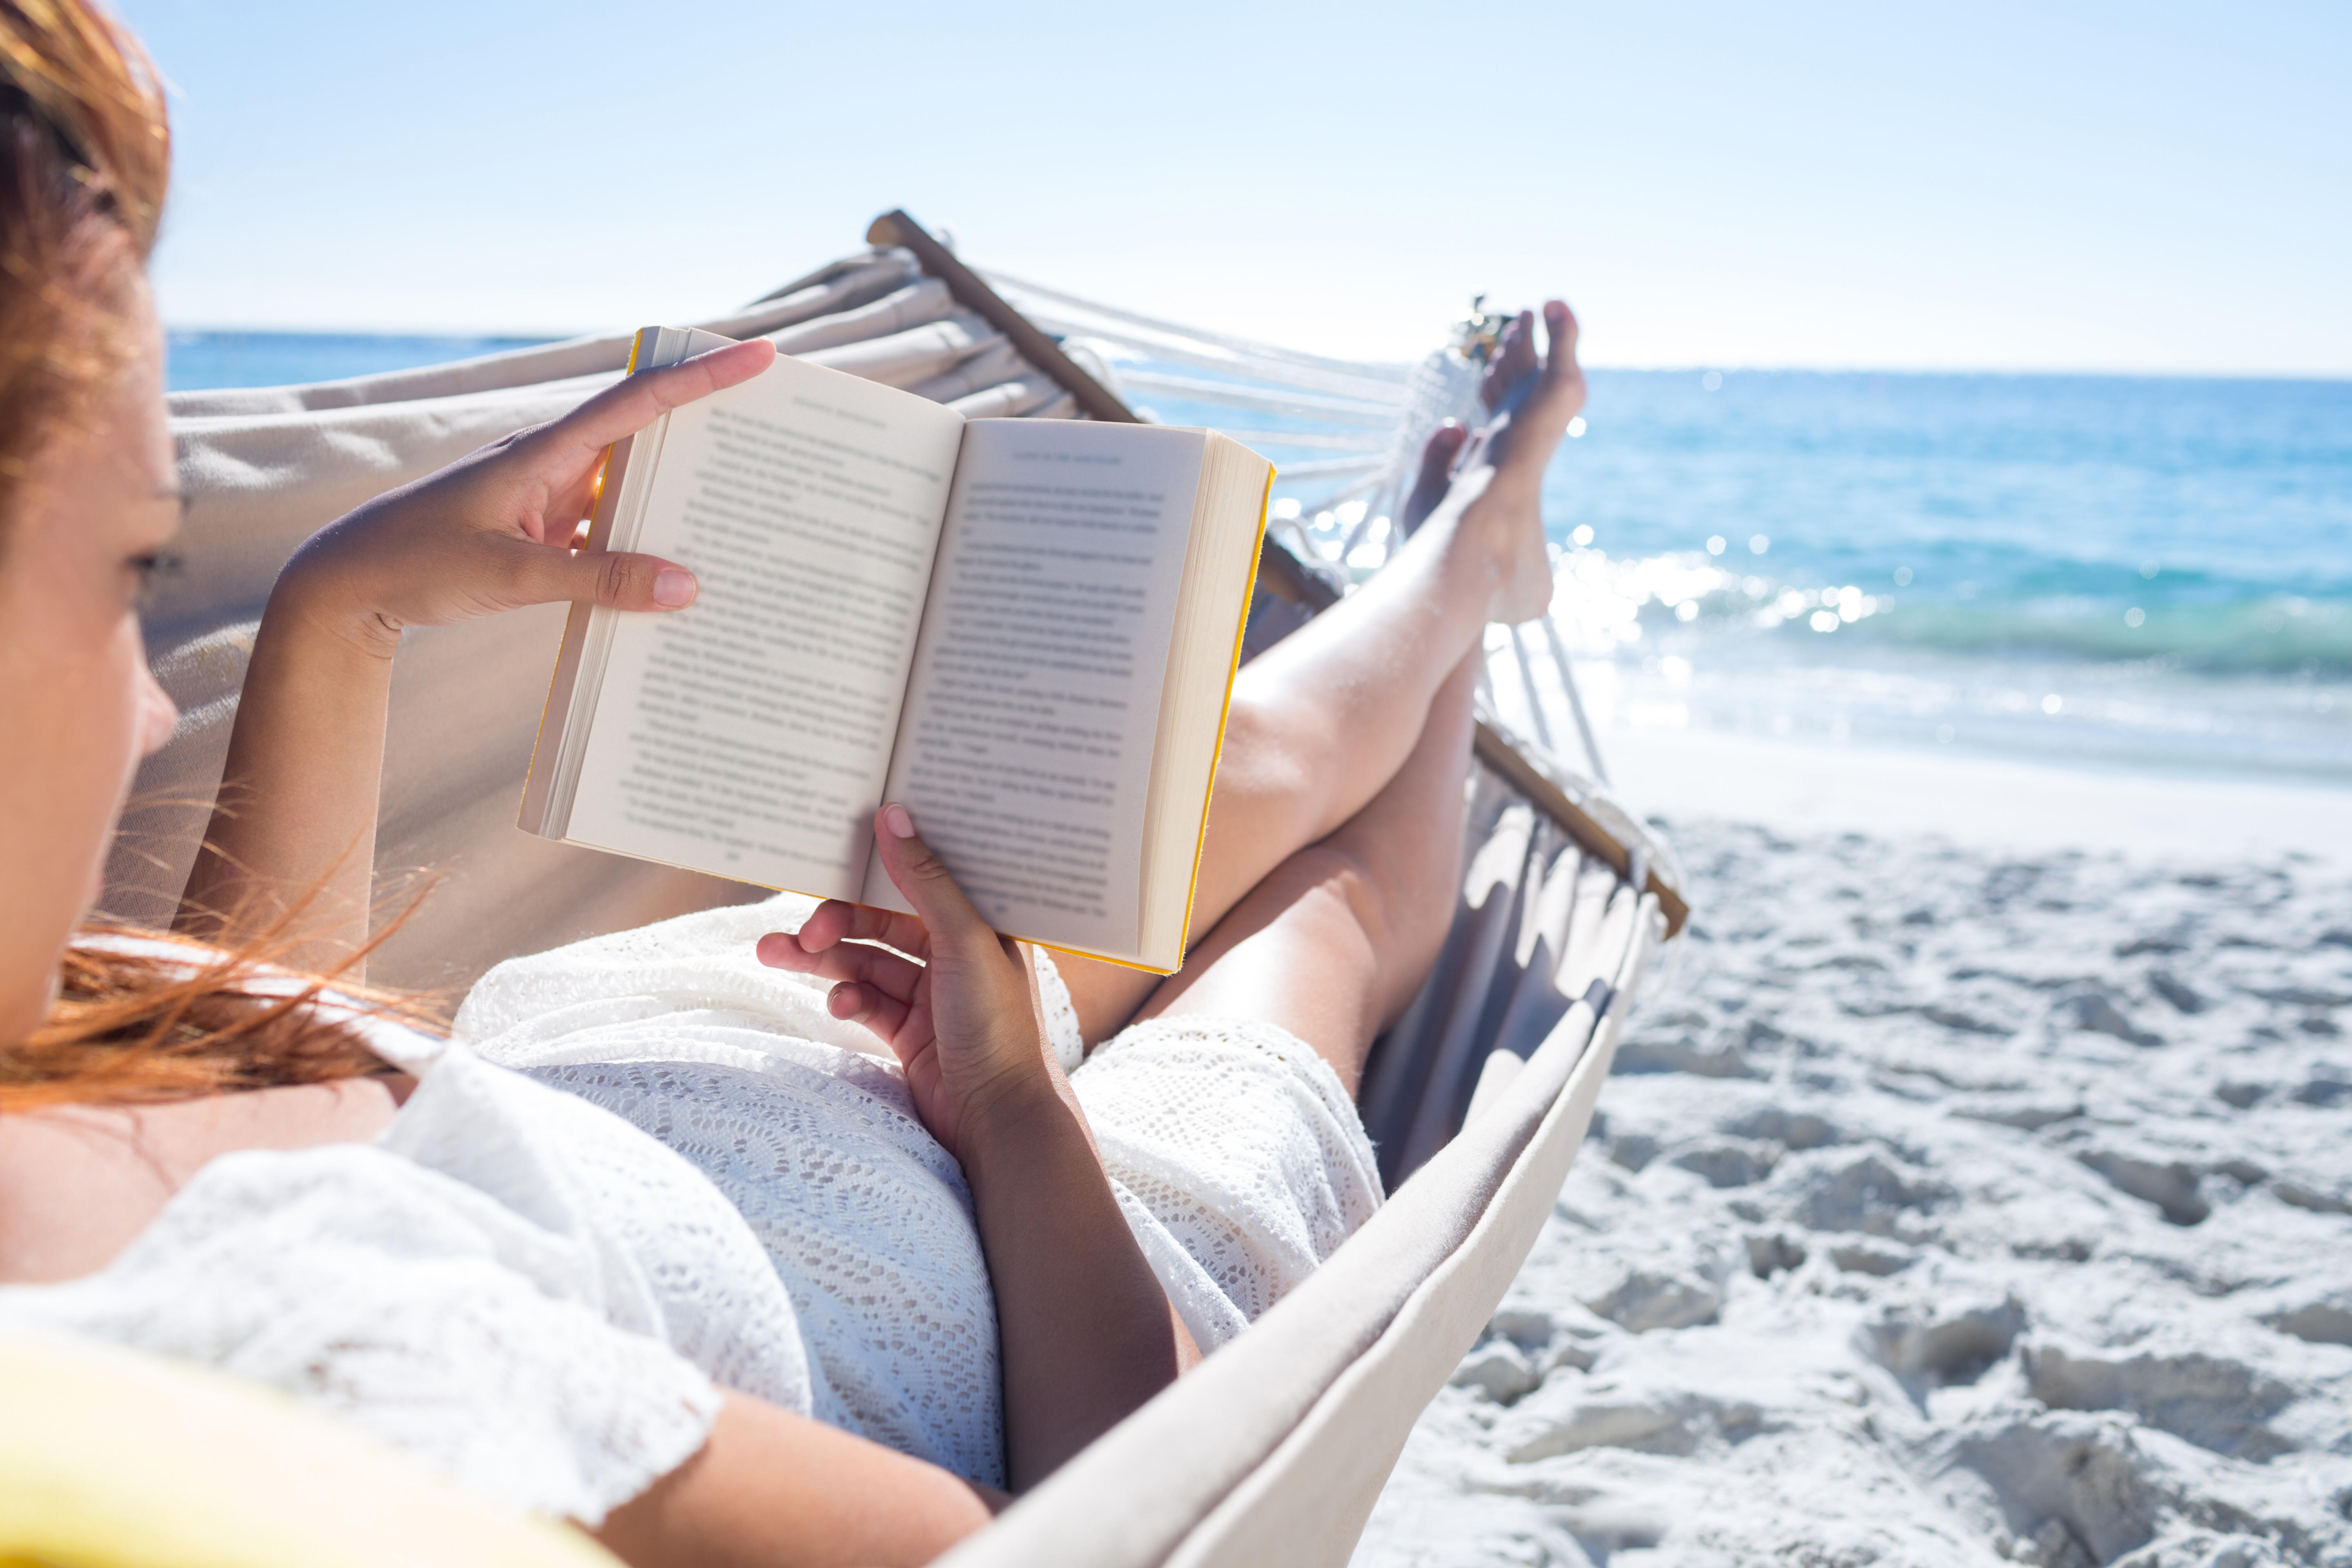 Get your beach read on.